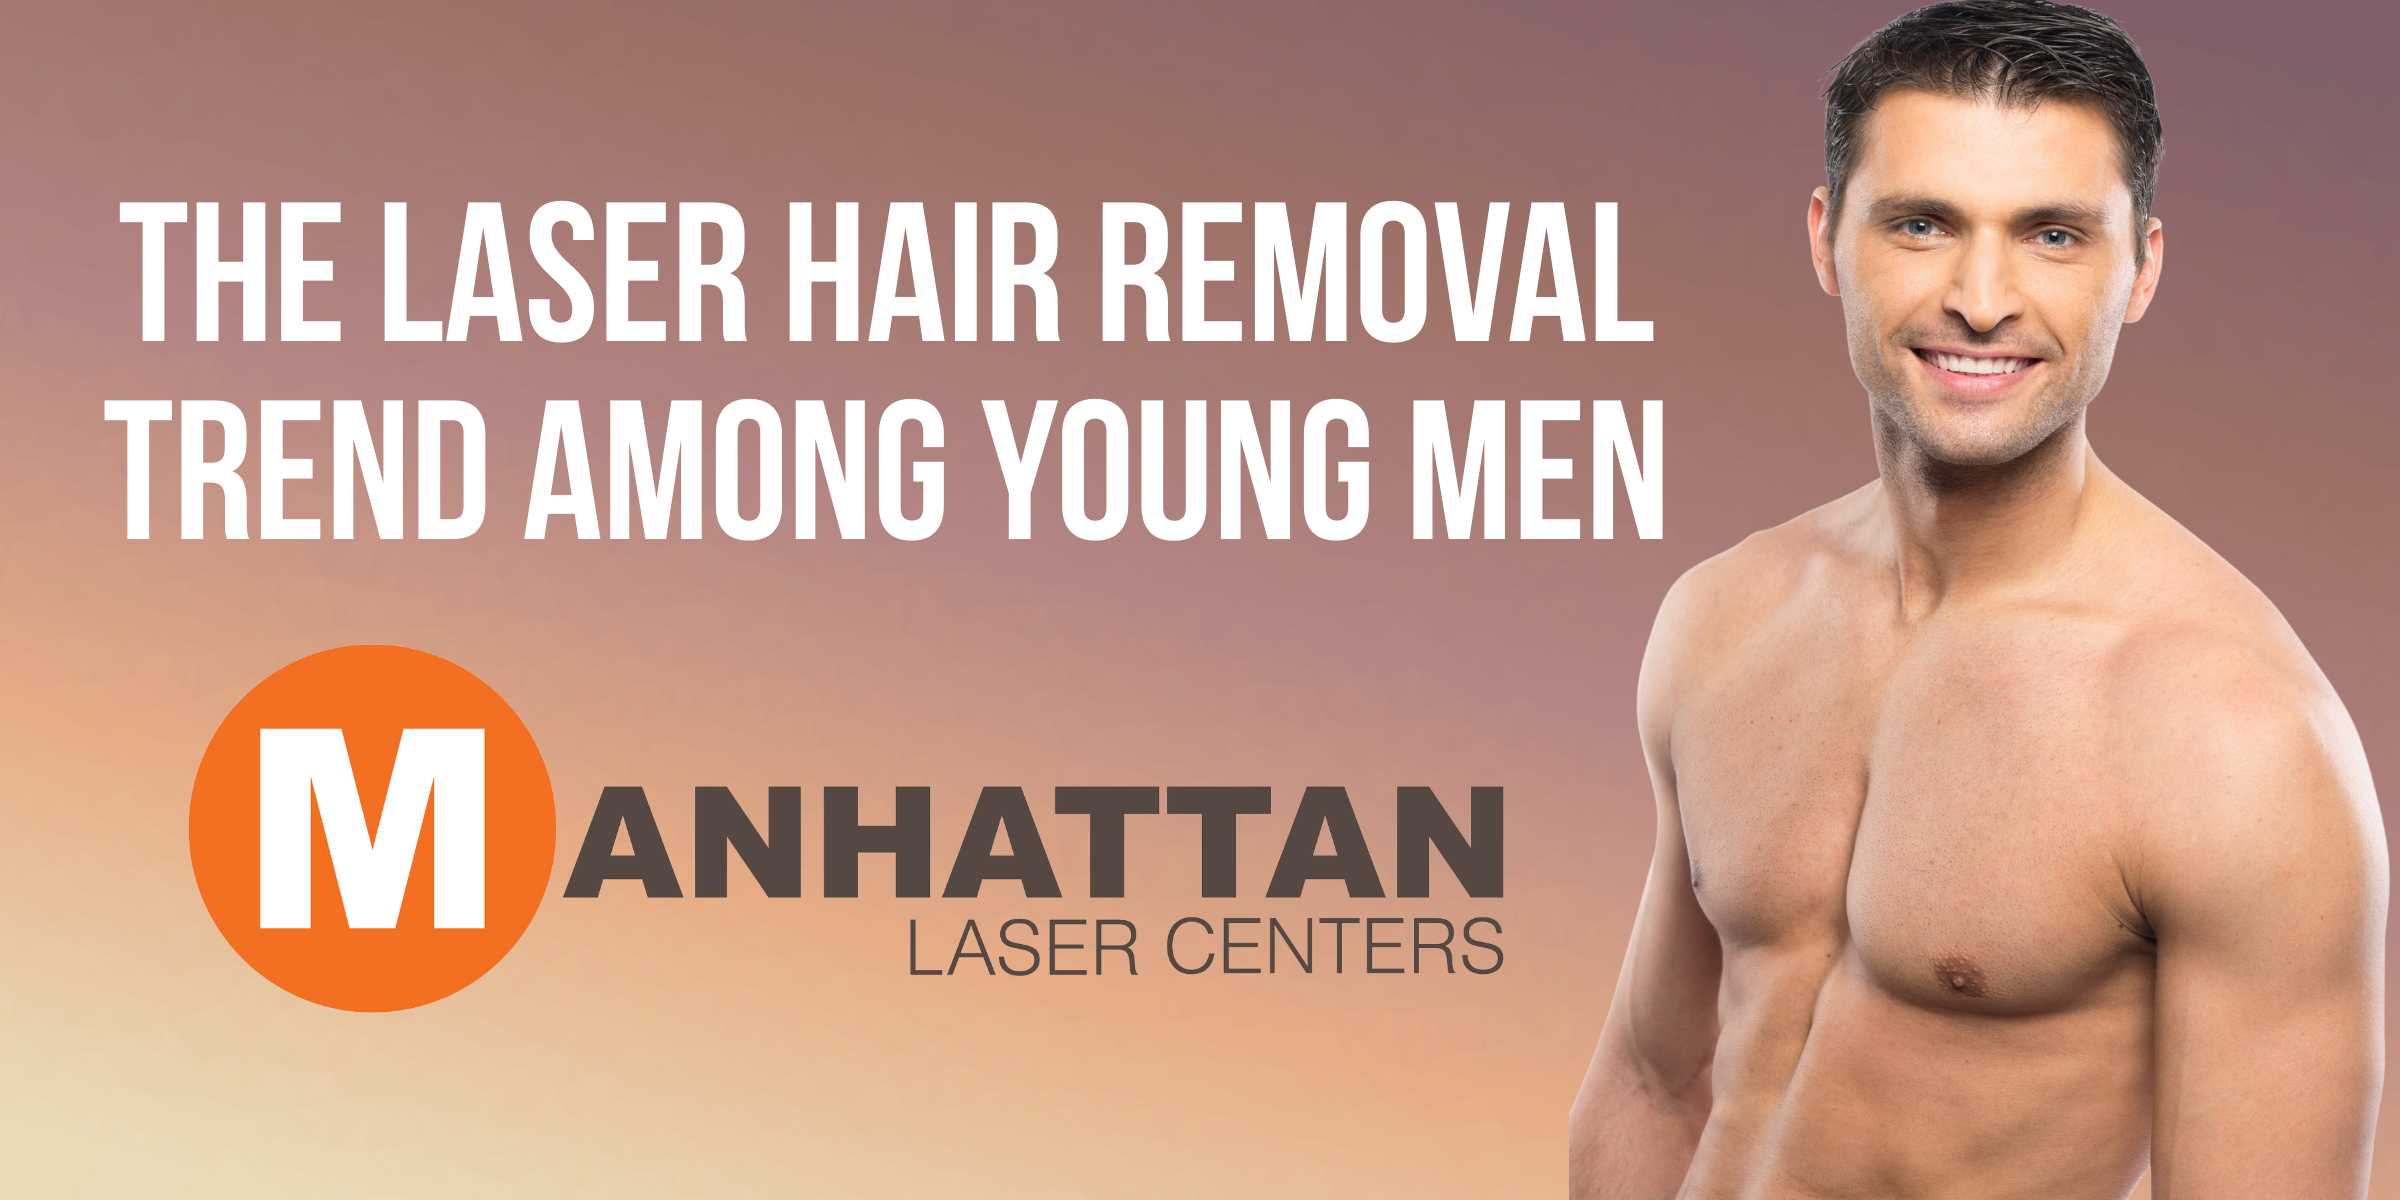 The Laser Hair Removal Trend Among Young Men